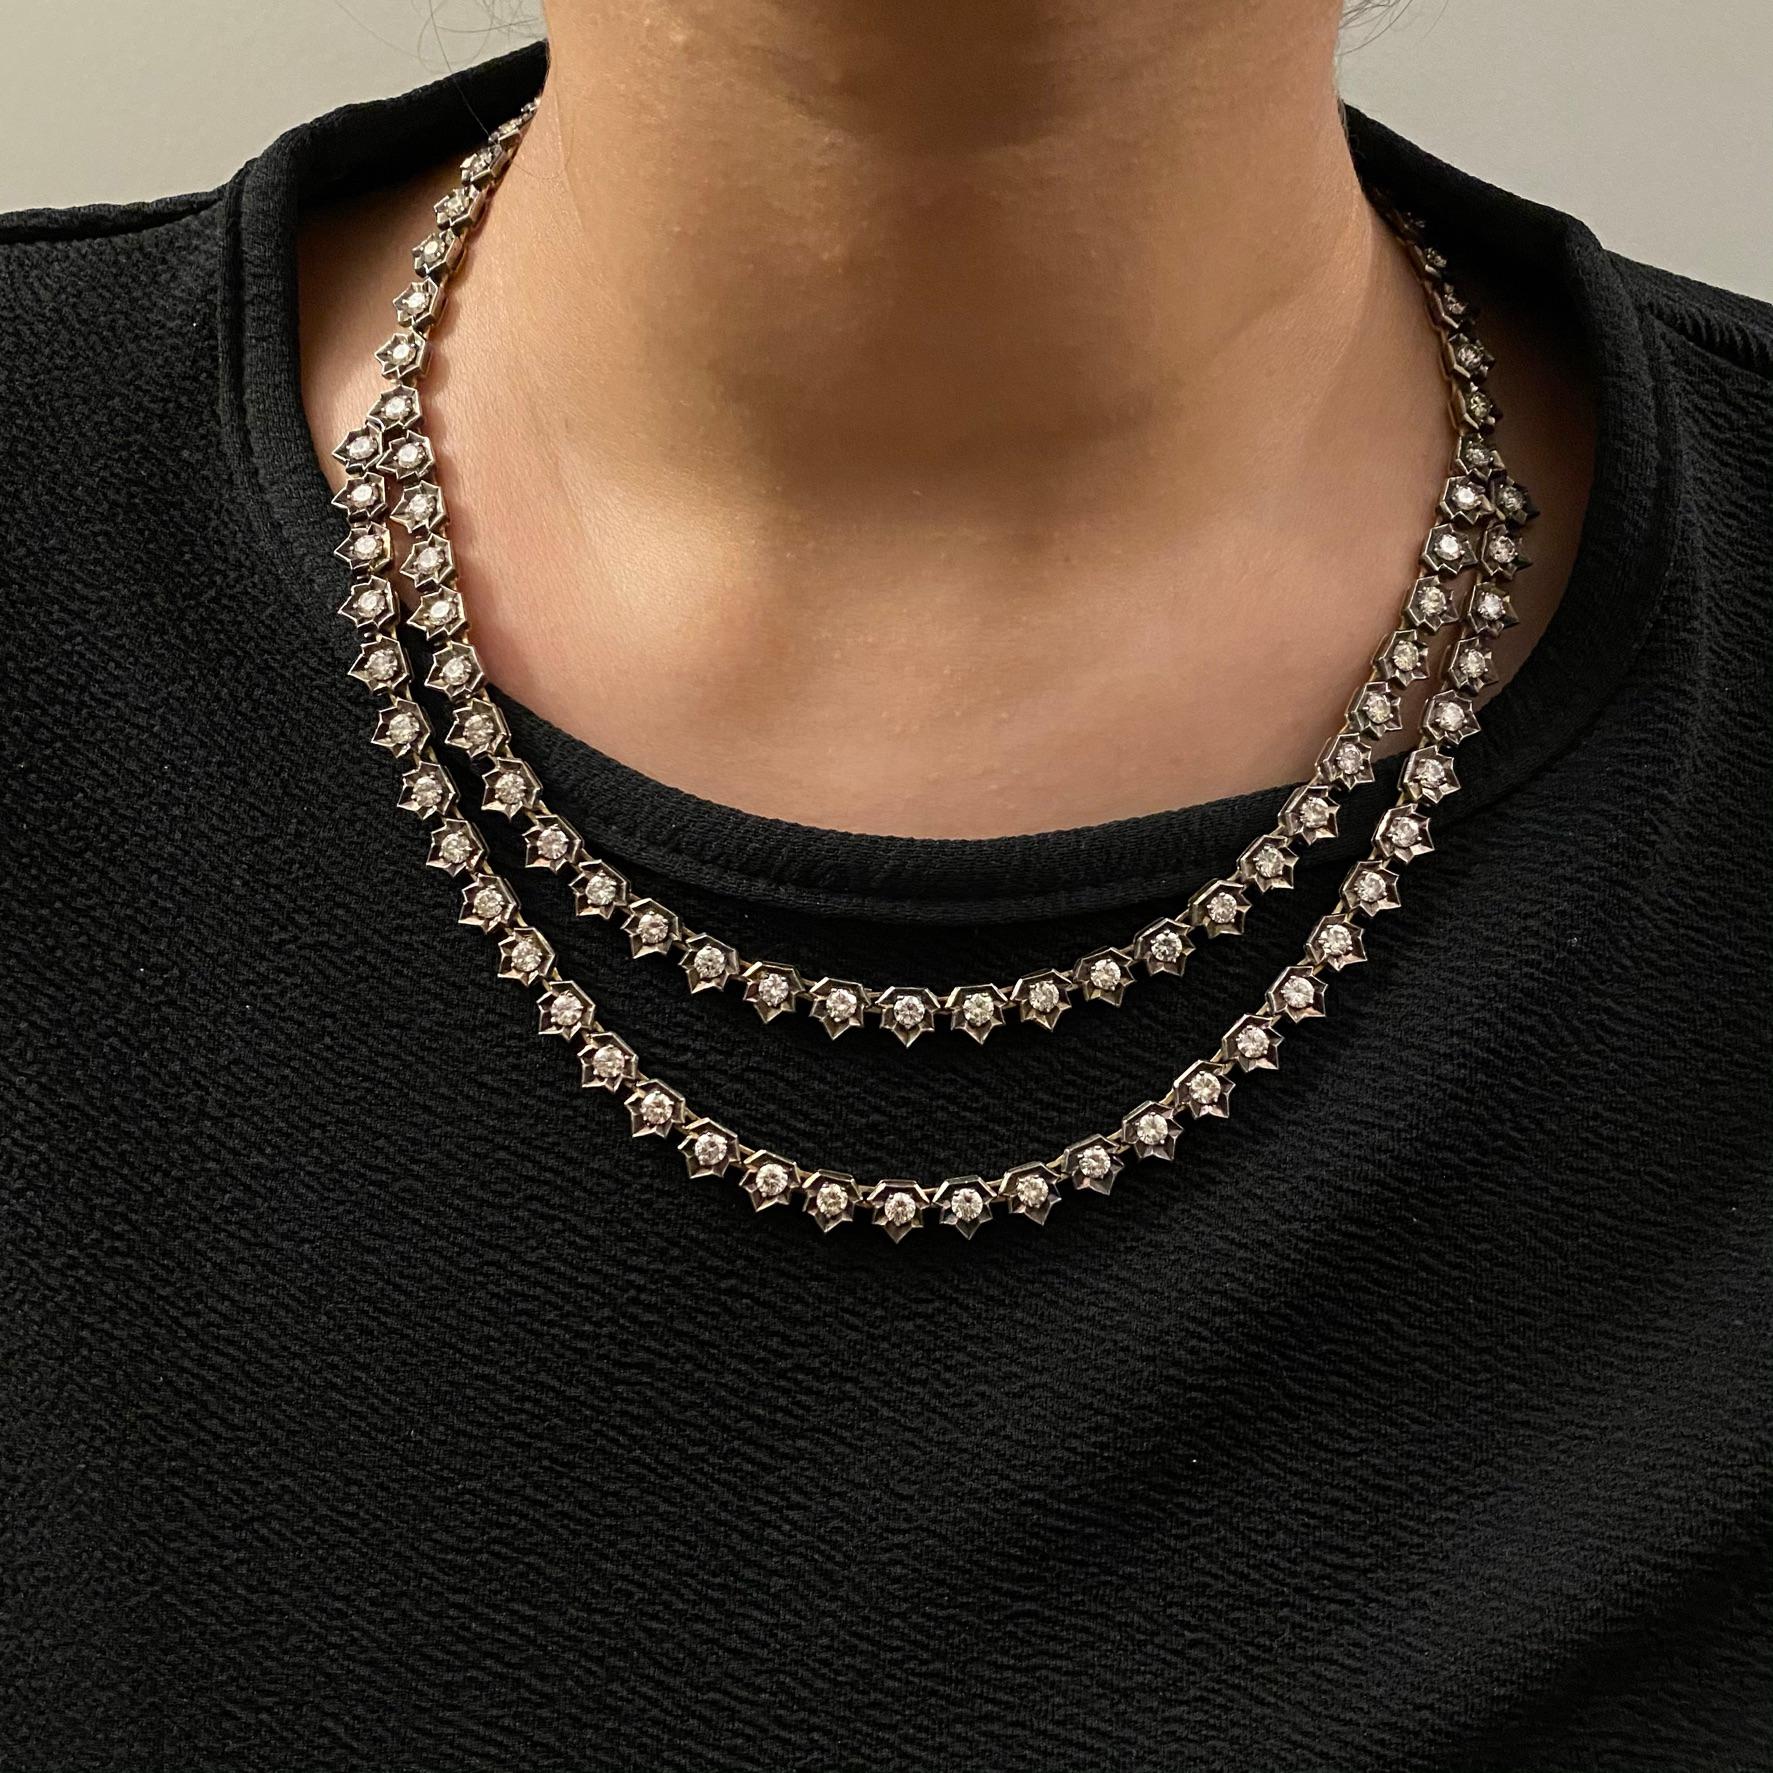 Introducing our Antique Diamond Double Line Necklace, a timeless and elegant piece that transports you to a bygone era of opulence and glamour. This exquisite necklace boasts a stunning 20 carats of diamonds, meticulously set in a regal 14K gold